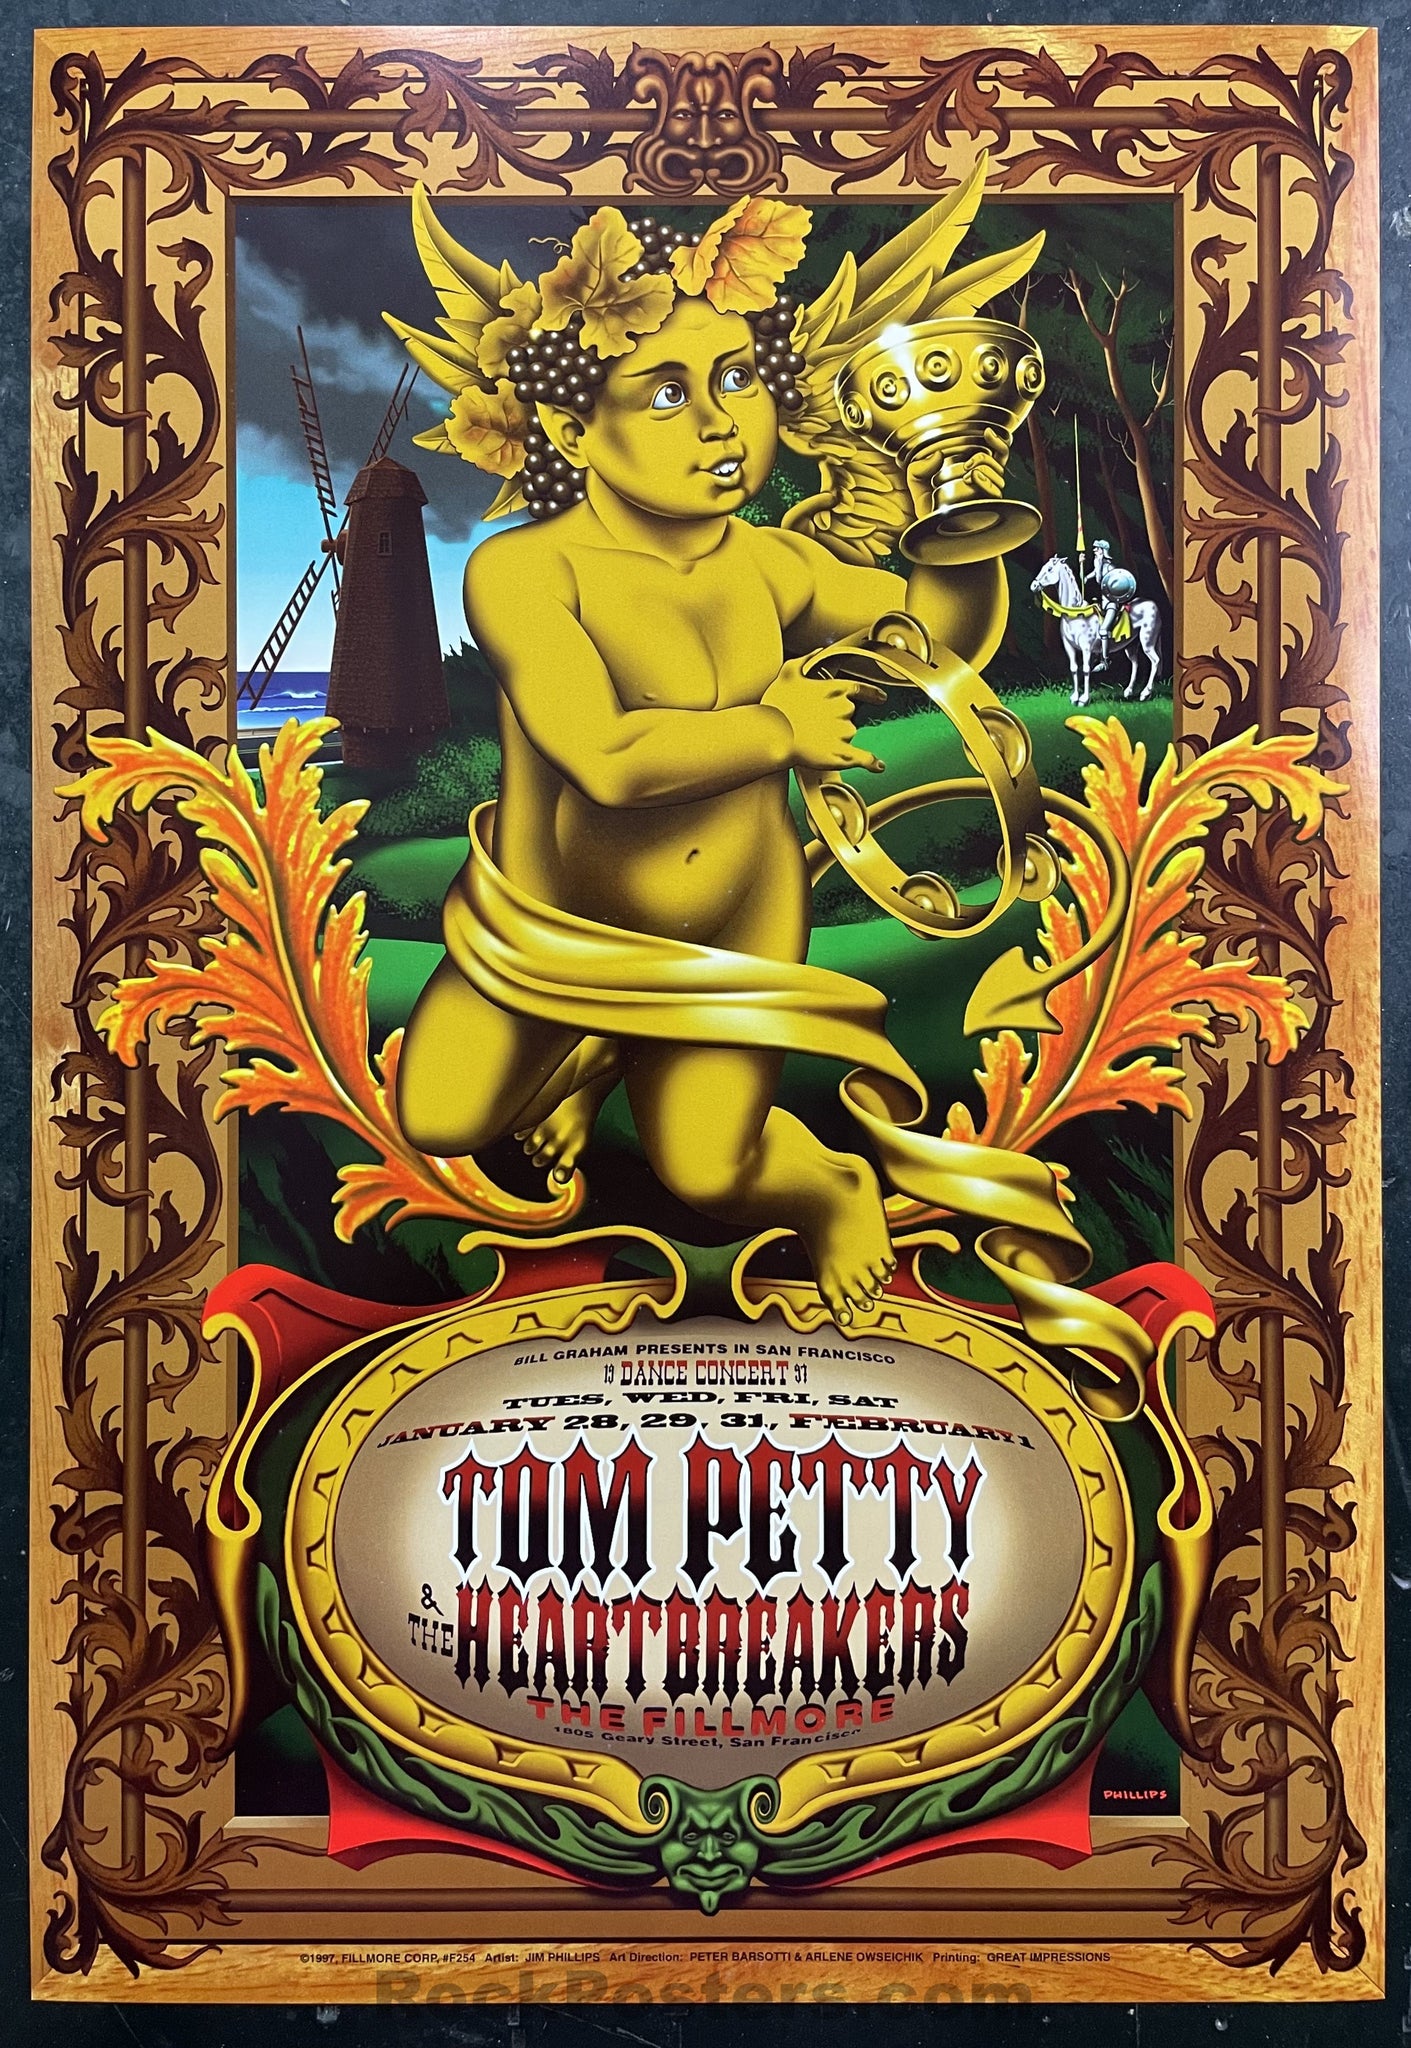 NF-254 - Tom Petty and The Heartbreakers - 1997 Poster - The Fillmore - Near Mint